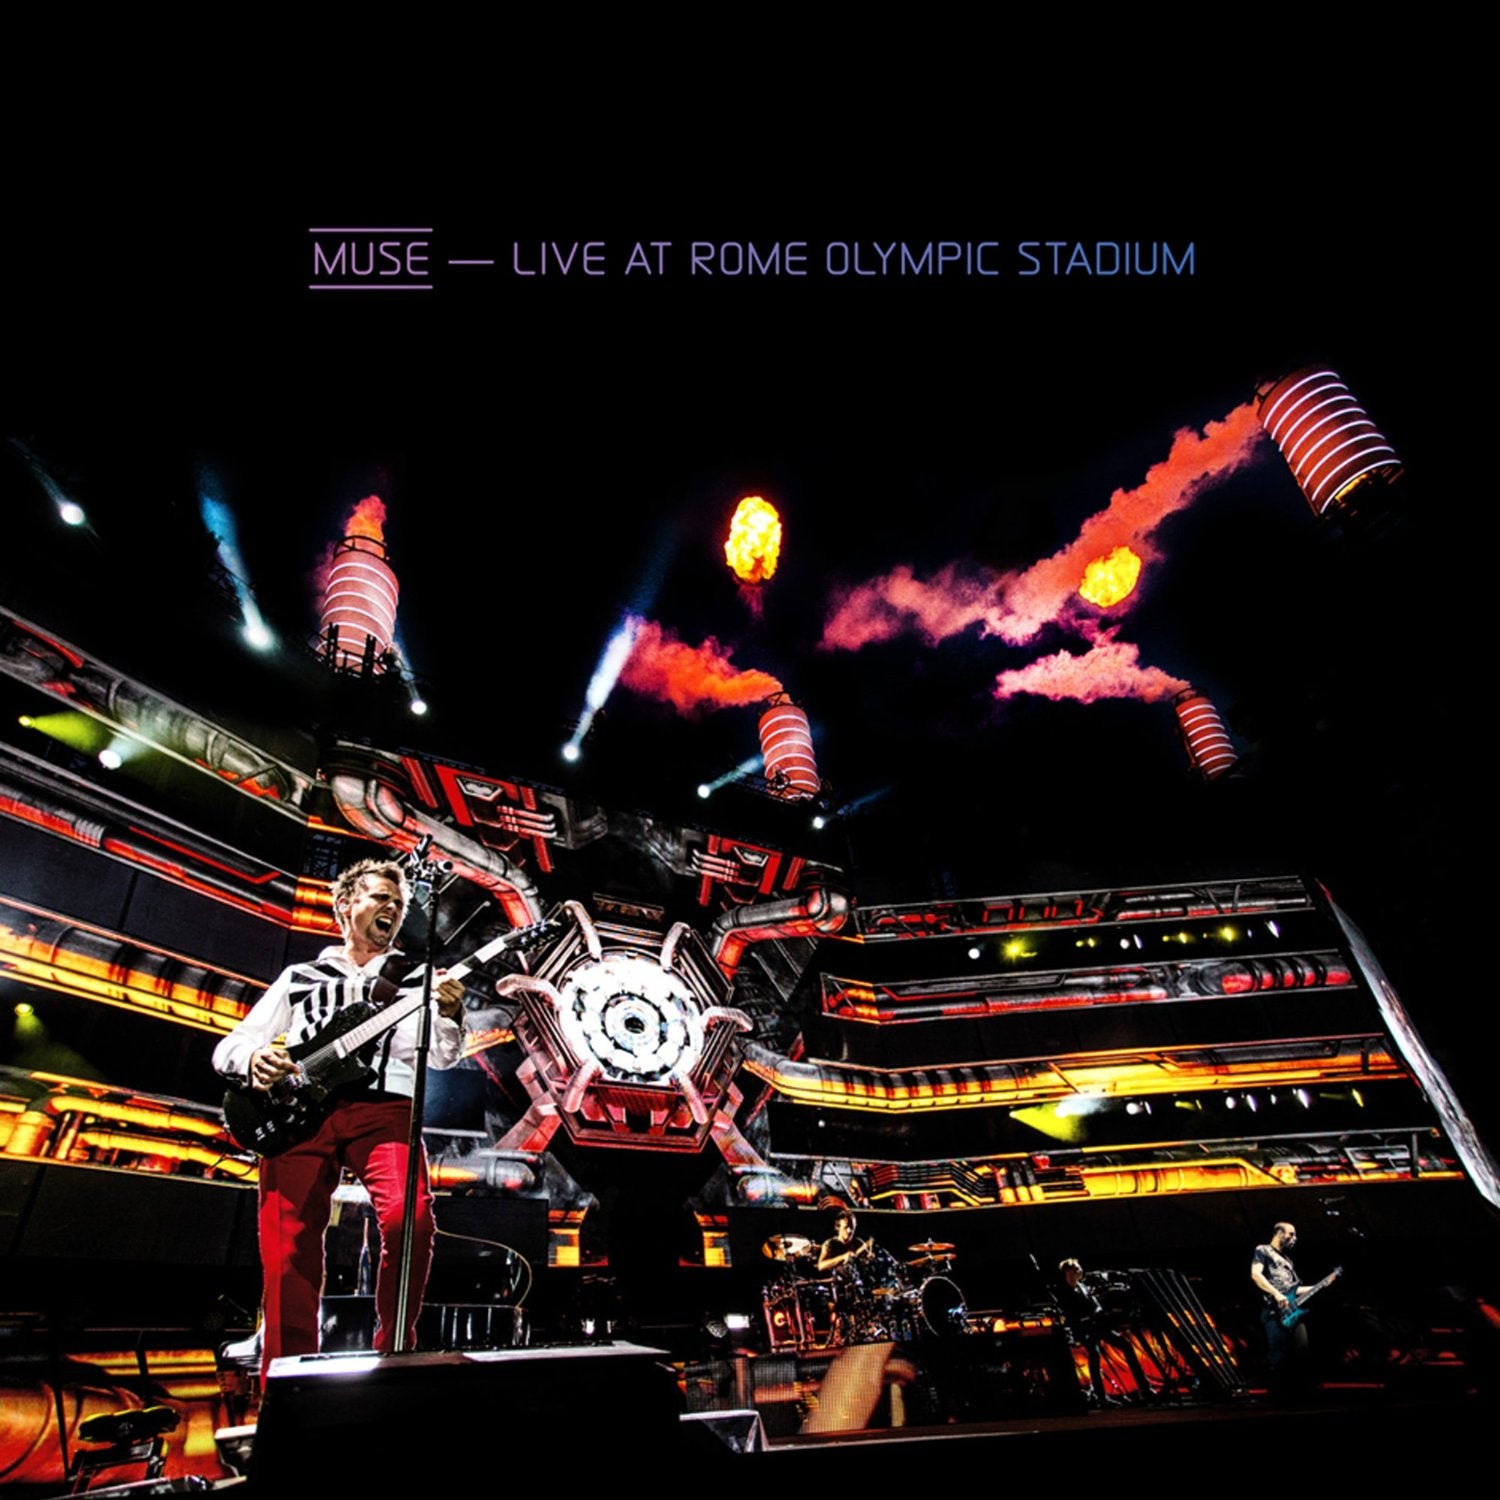 Muse "Live At Rome Olympic Stadium" CD/Blu-ray